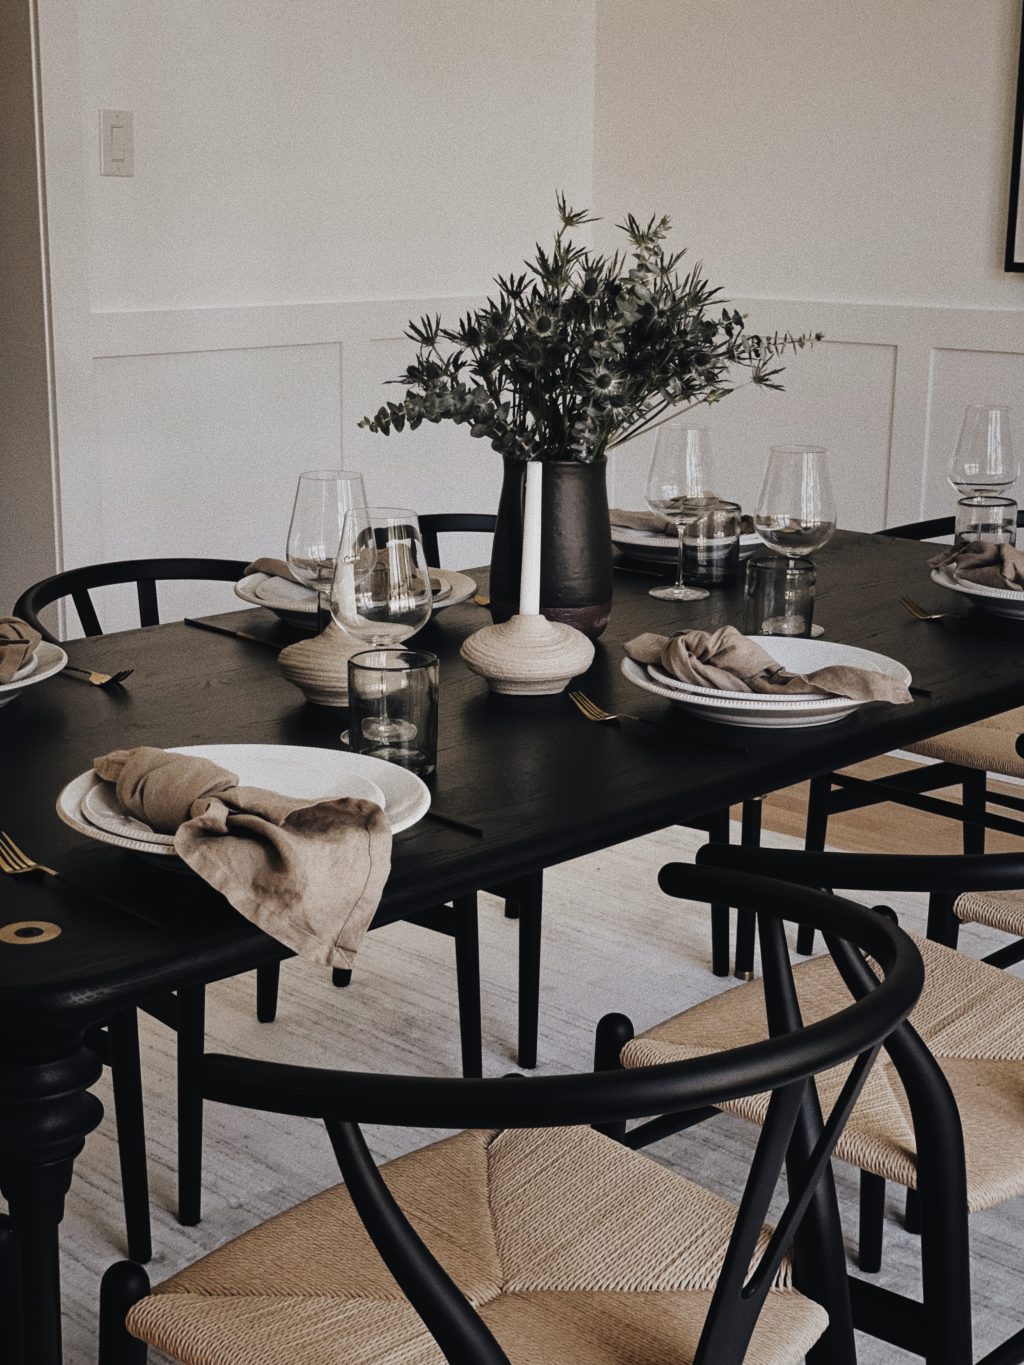 A Moody Tablescape + Tips for Summertime Hosting